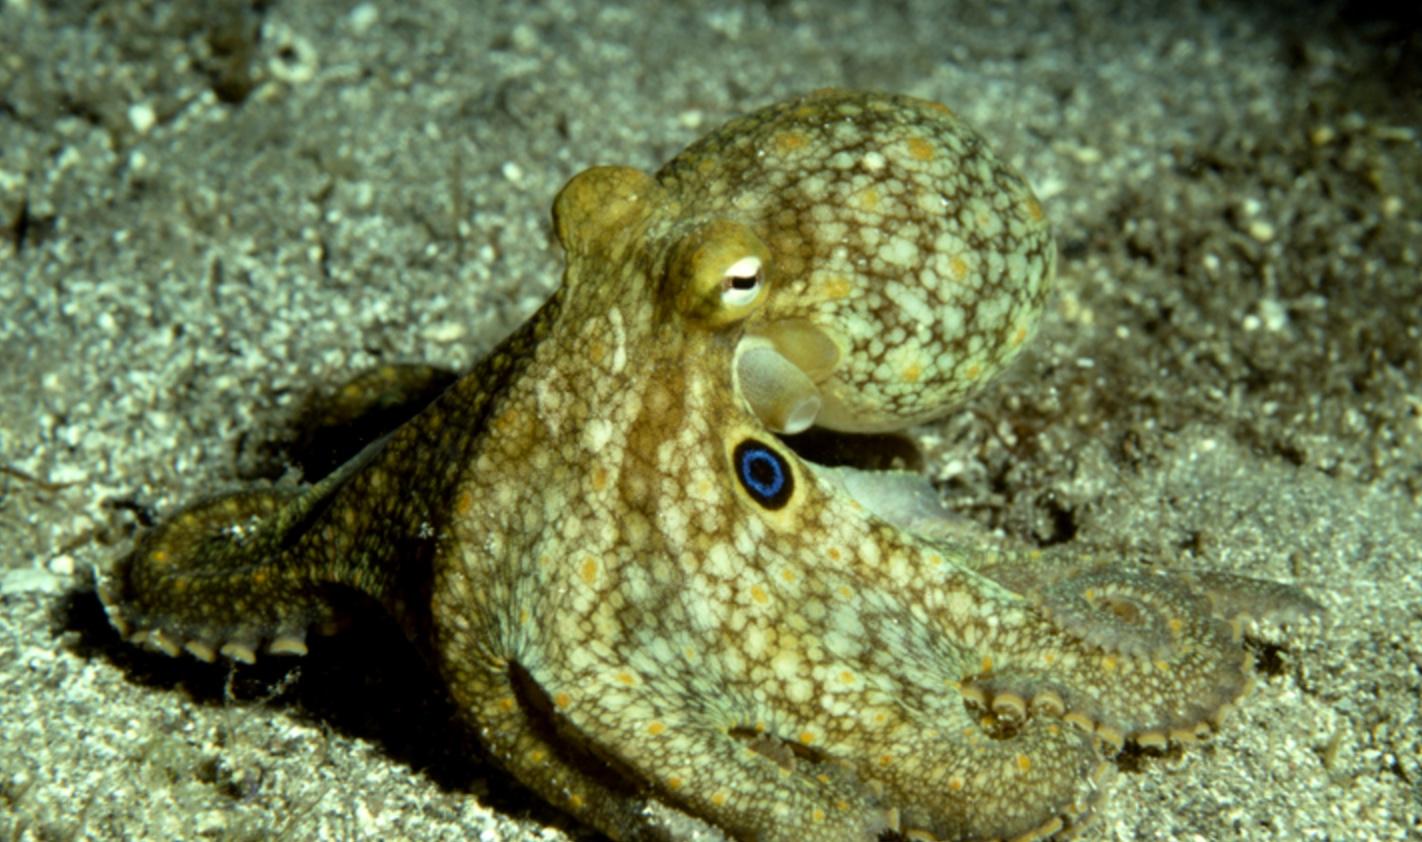 New Camouflage Material Mimics Octopus Skin | WCAI